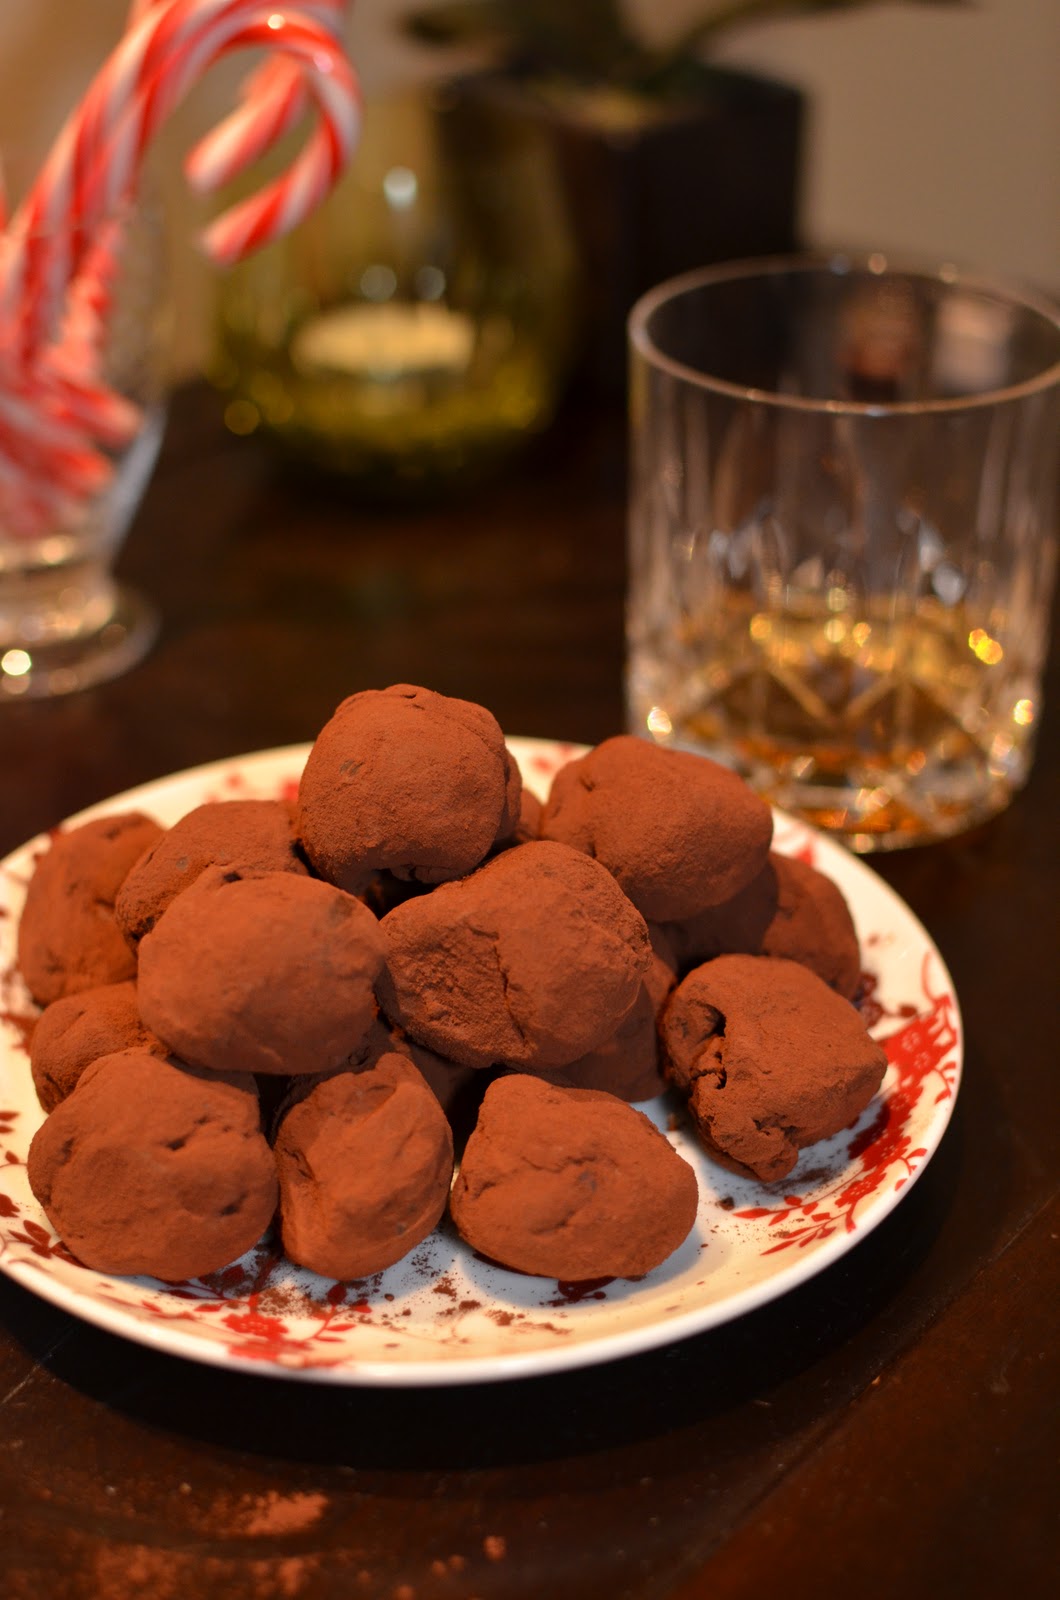 Playing with Flour: Chocolate truffles with Grand Marnier (or plain)